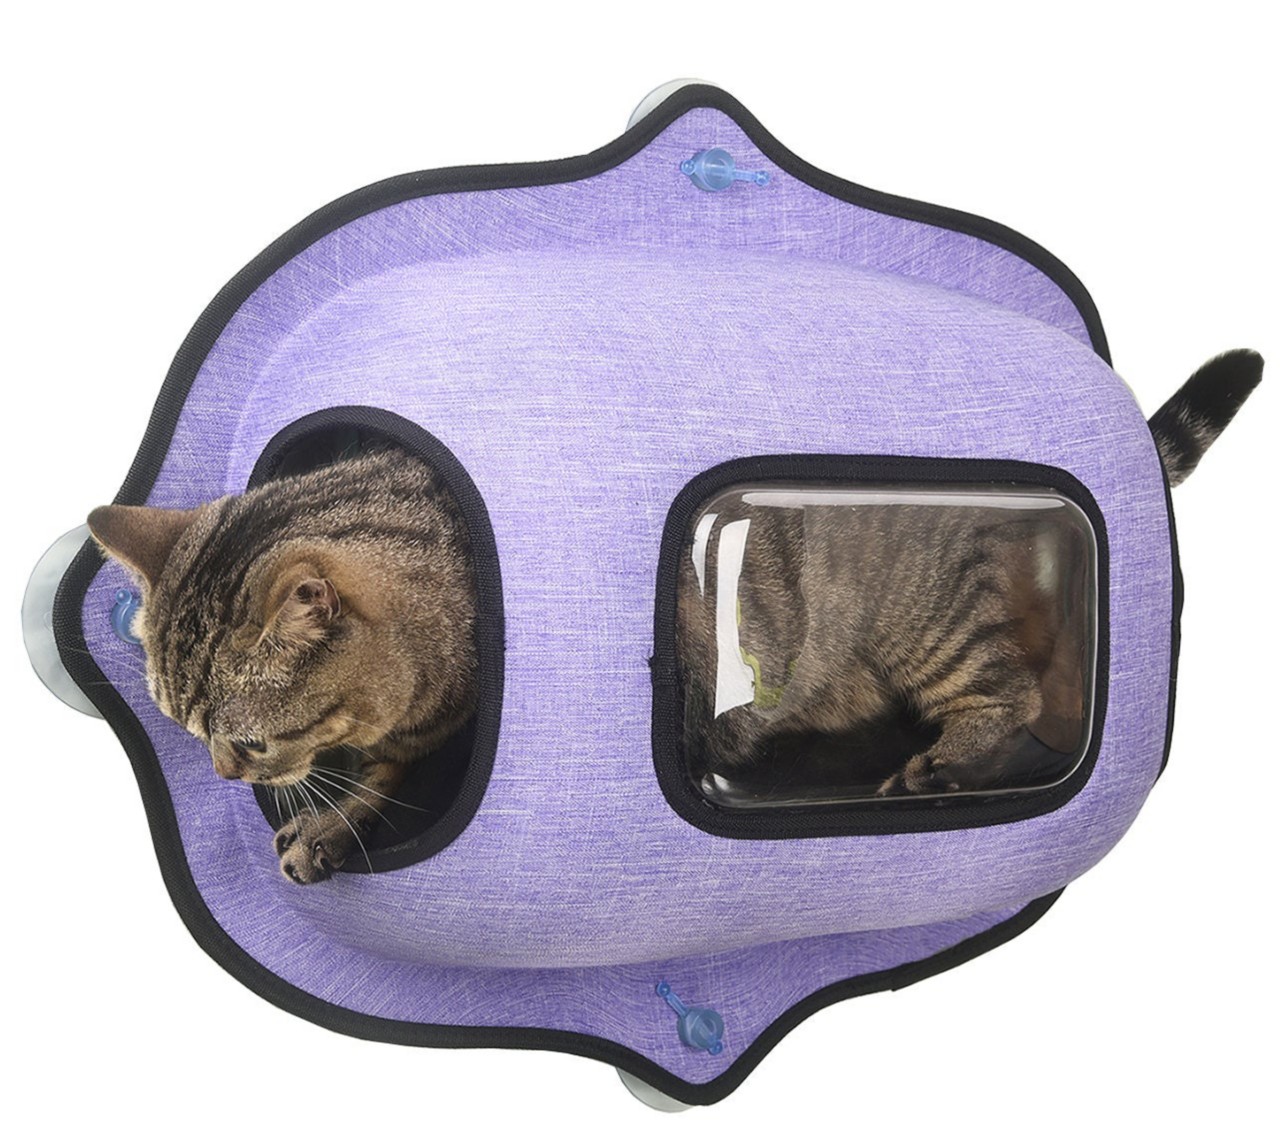 Links to cat hammock and window beds